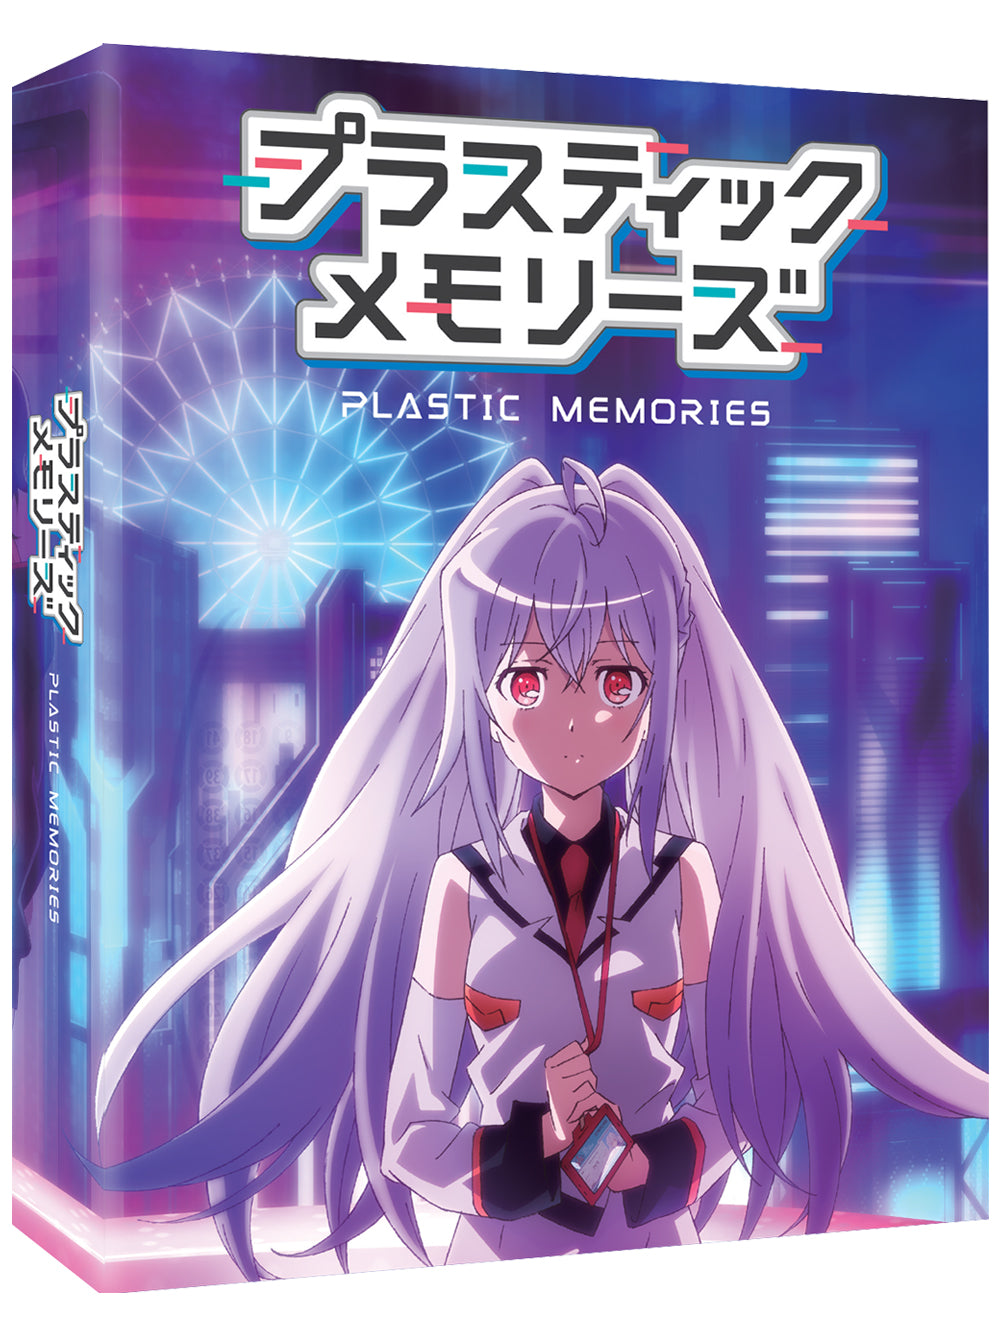 Plastic Memories Part 1 Limited Collector's Edition Anime Blu-ray [B]